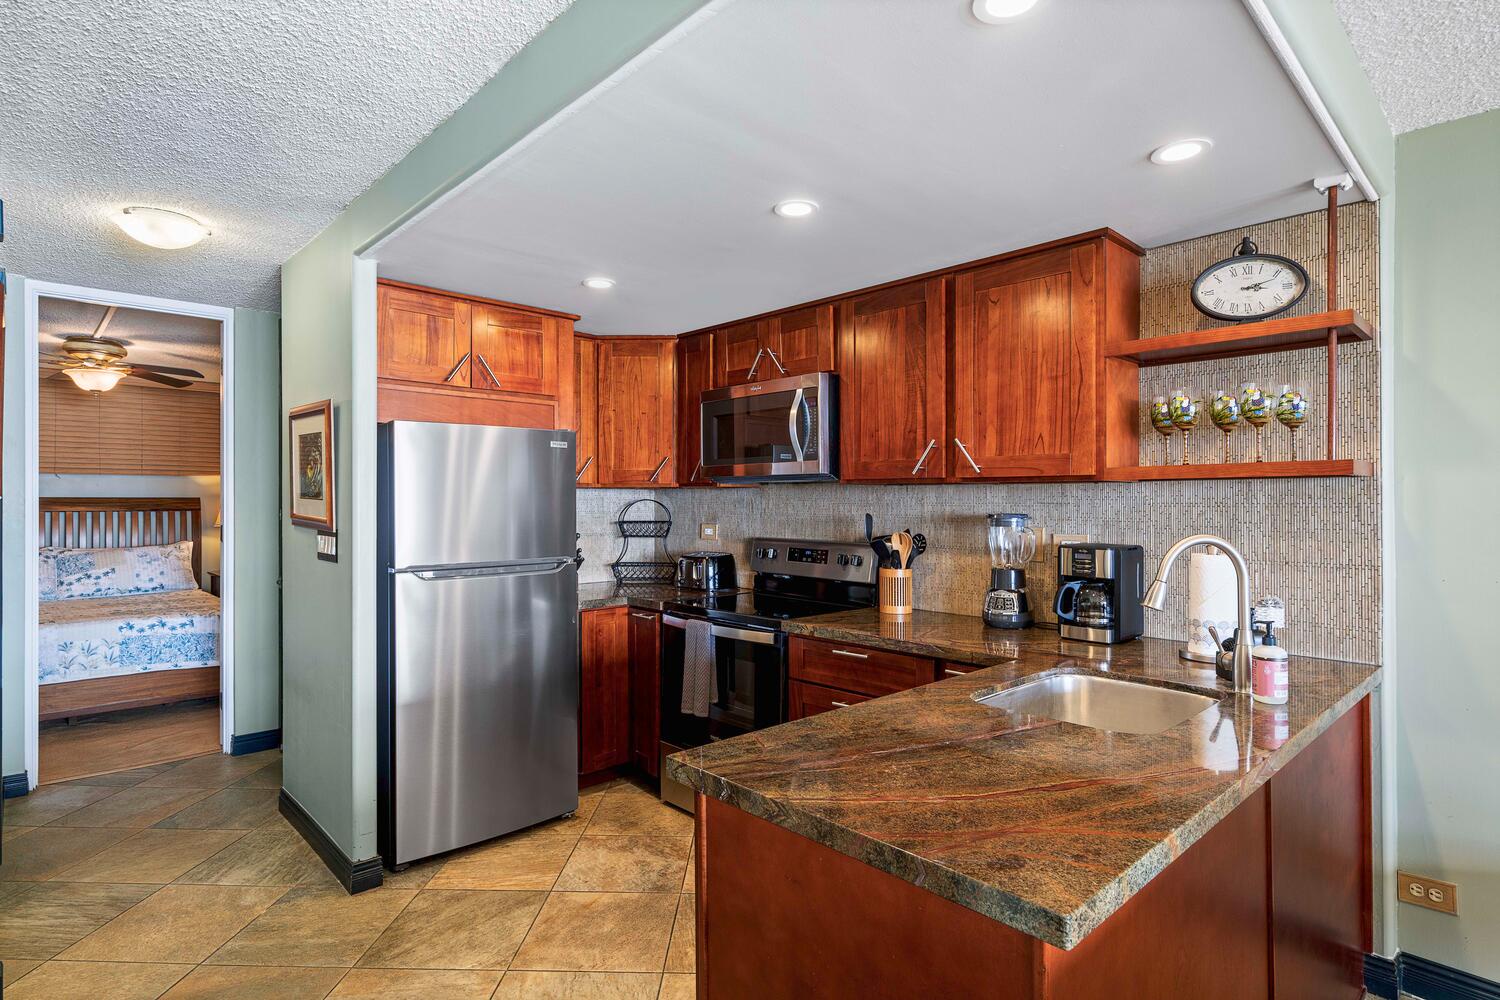 Kailua Kona Vacation Rentals, Kona Alii 302 - Fully-stocked kitchen with ample counter space for a convenient meal prep.